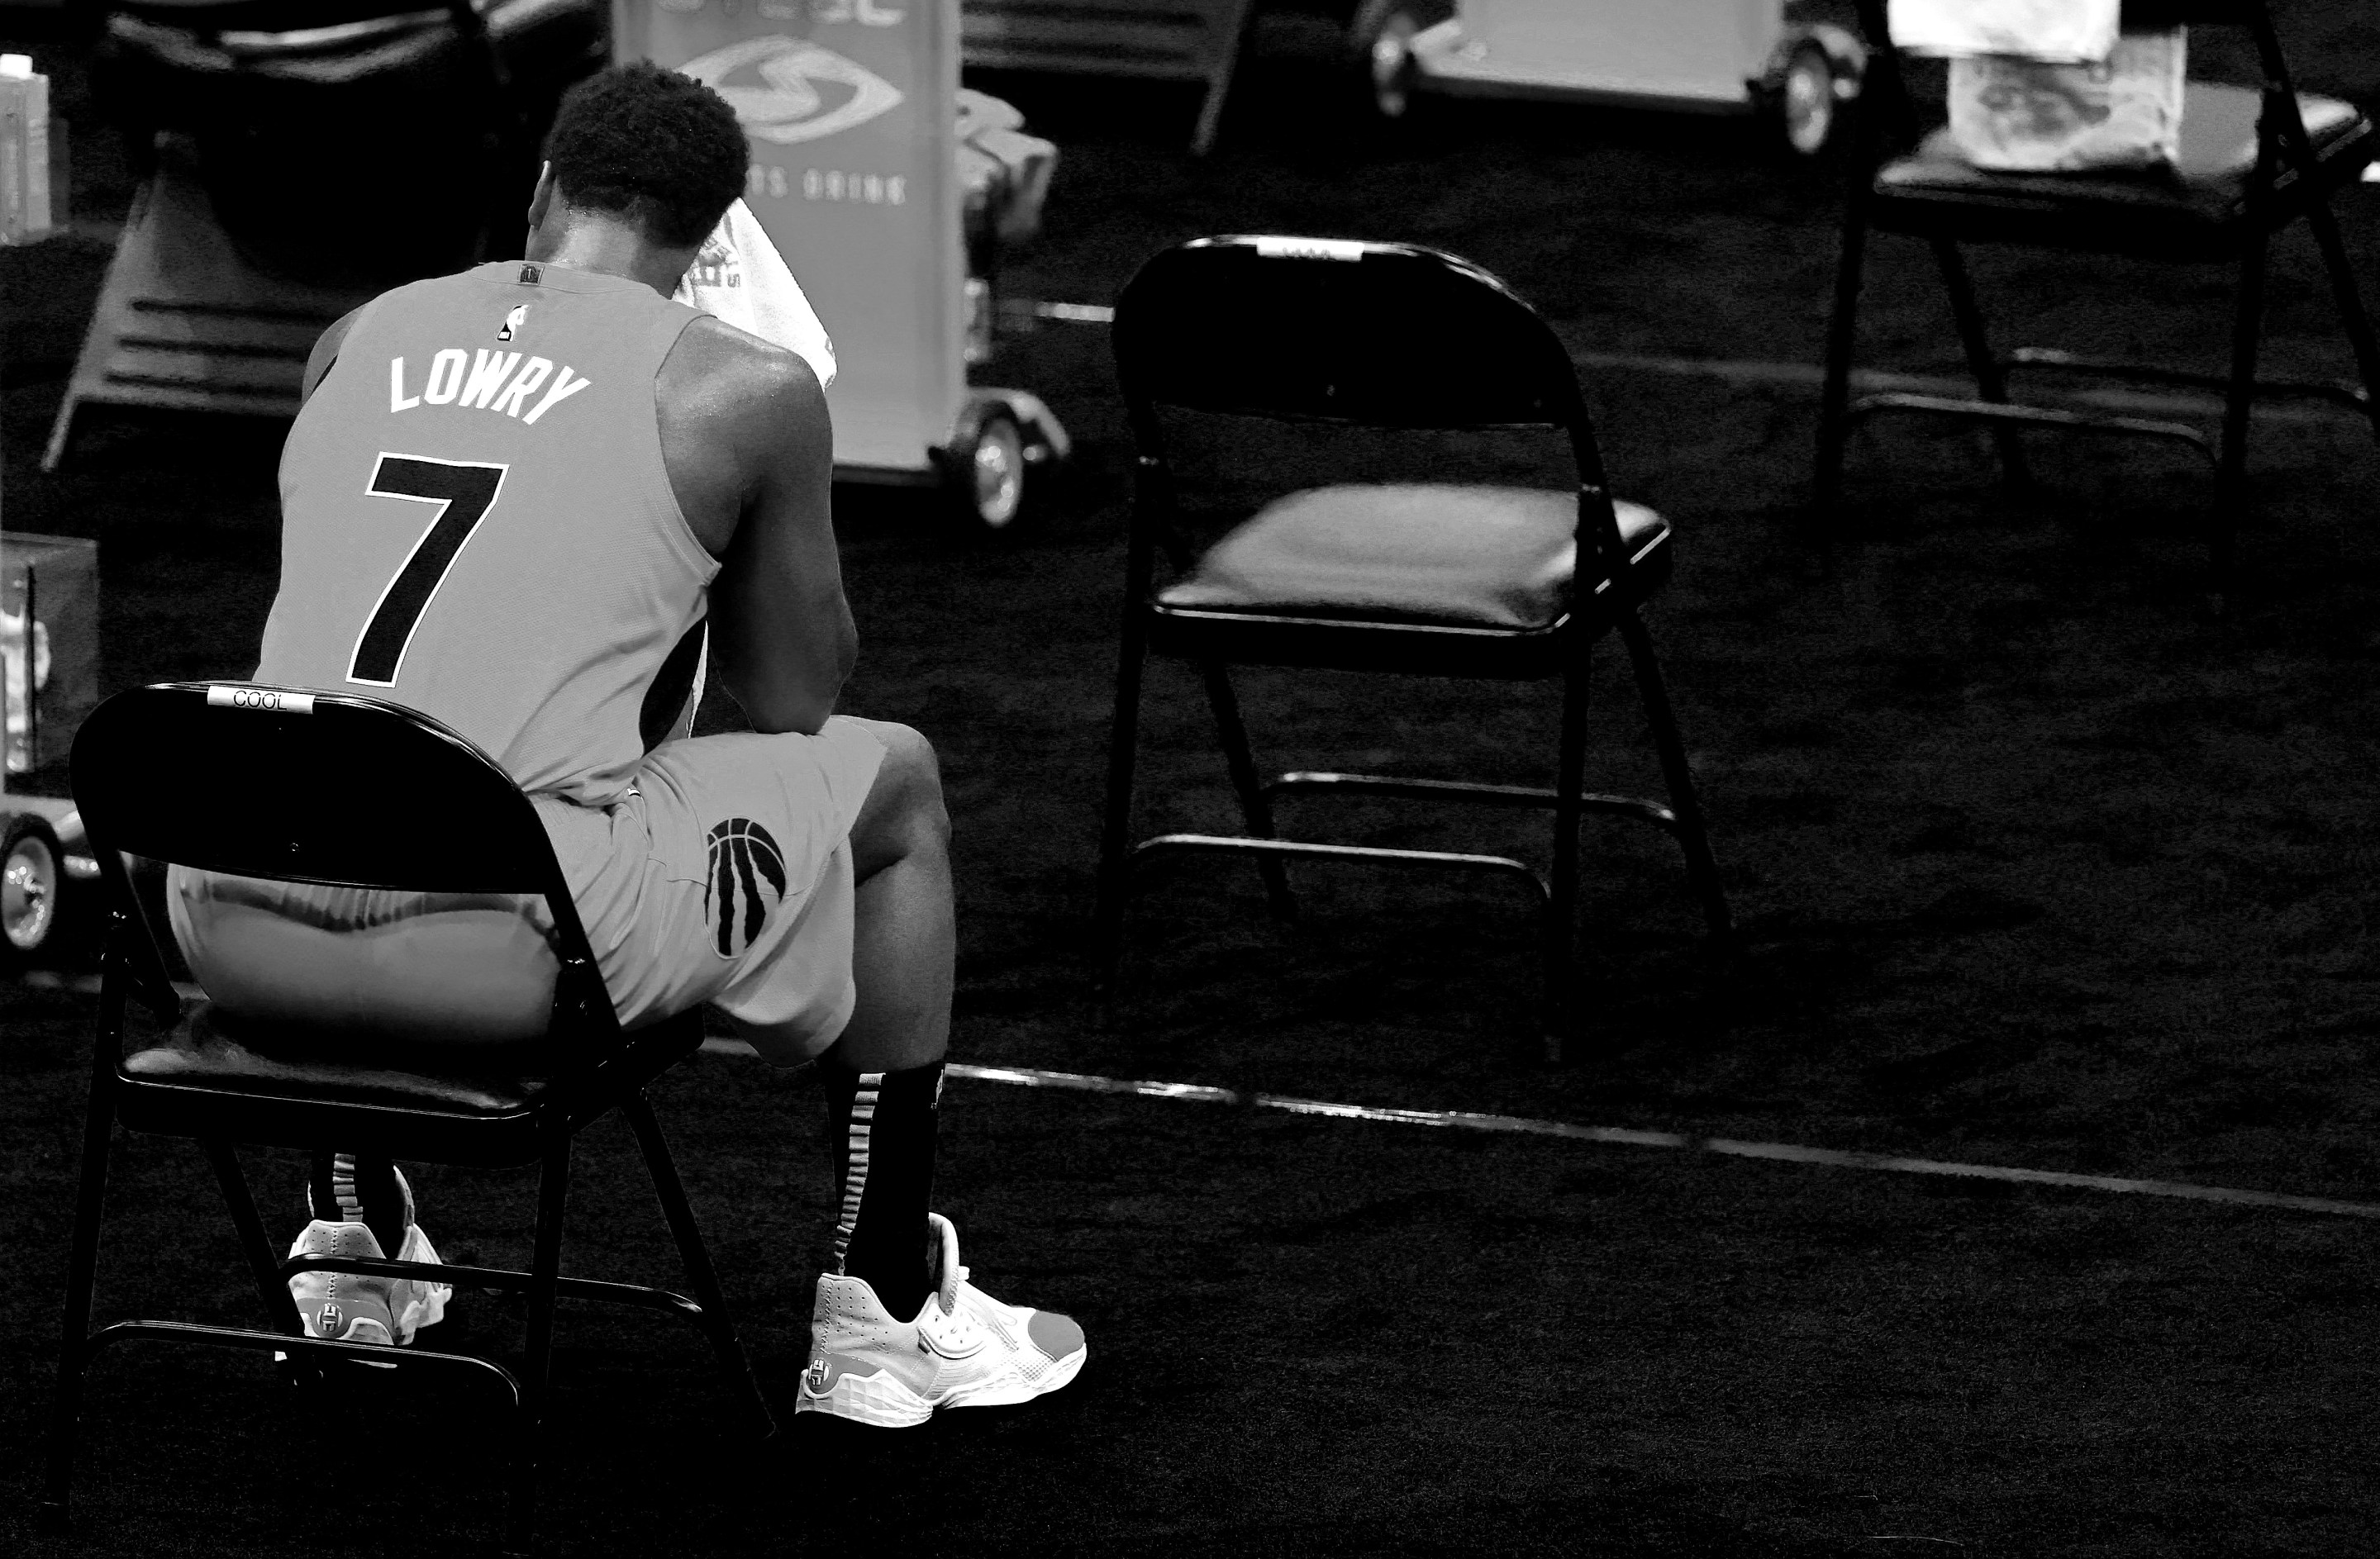 Kyle Lowry sits on the bench in a moody black-and-white image.